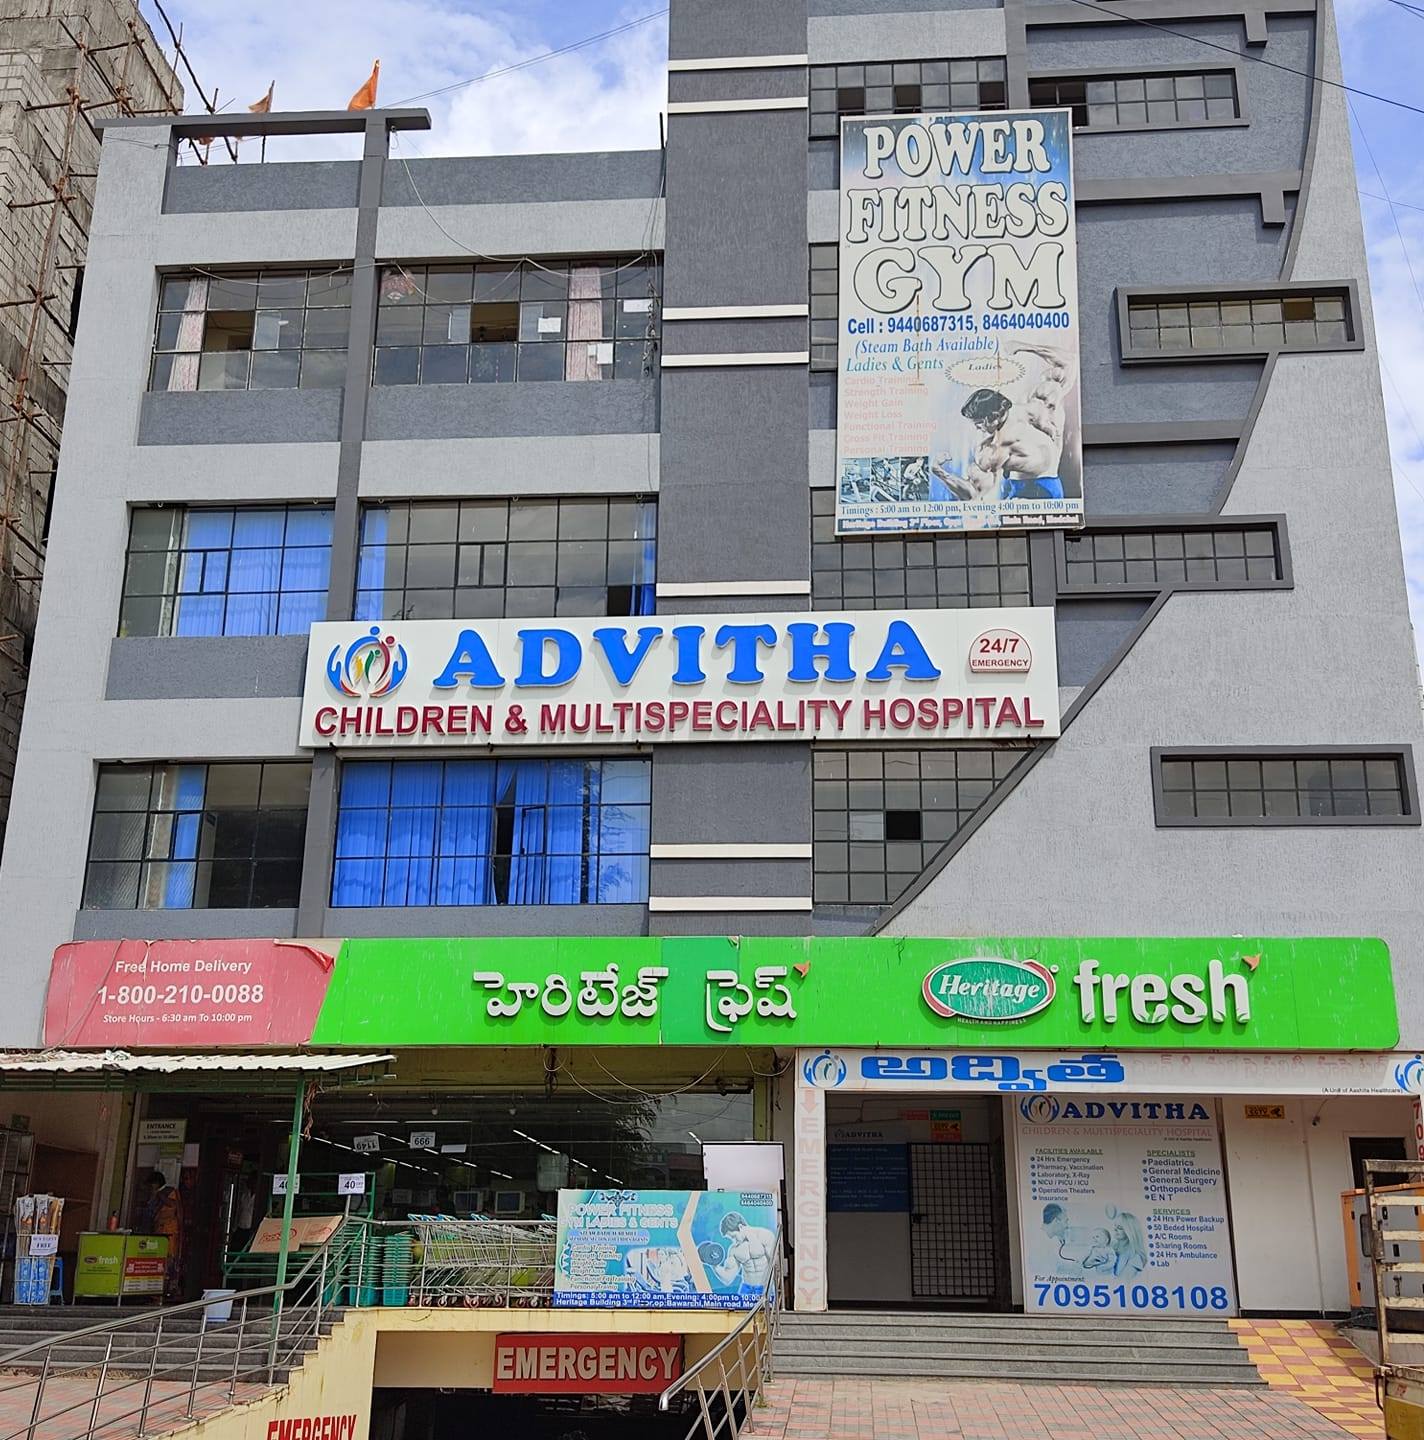 Advitha Children and Multispeciality Hospital - Medchal, Hyderabad